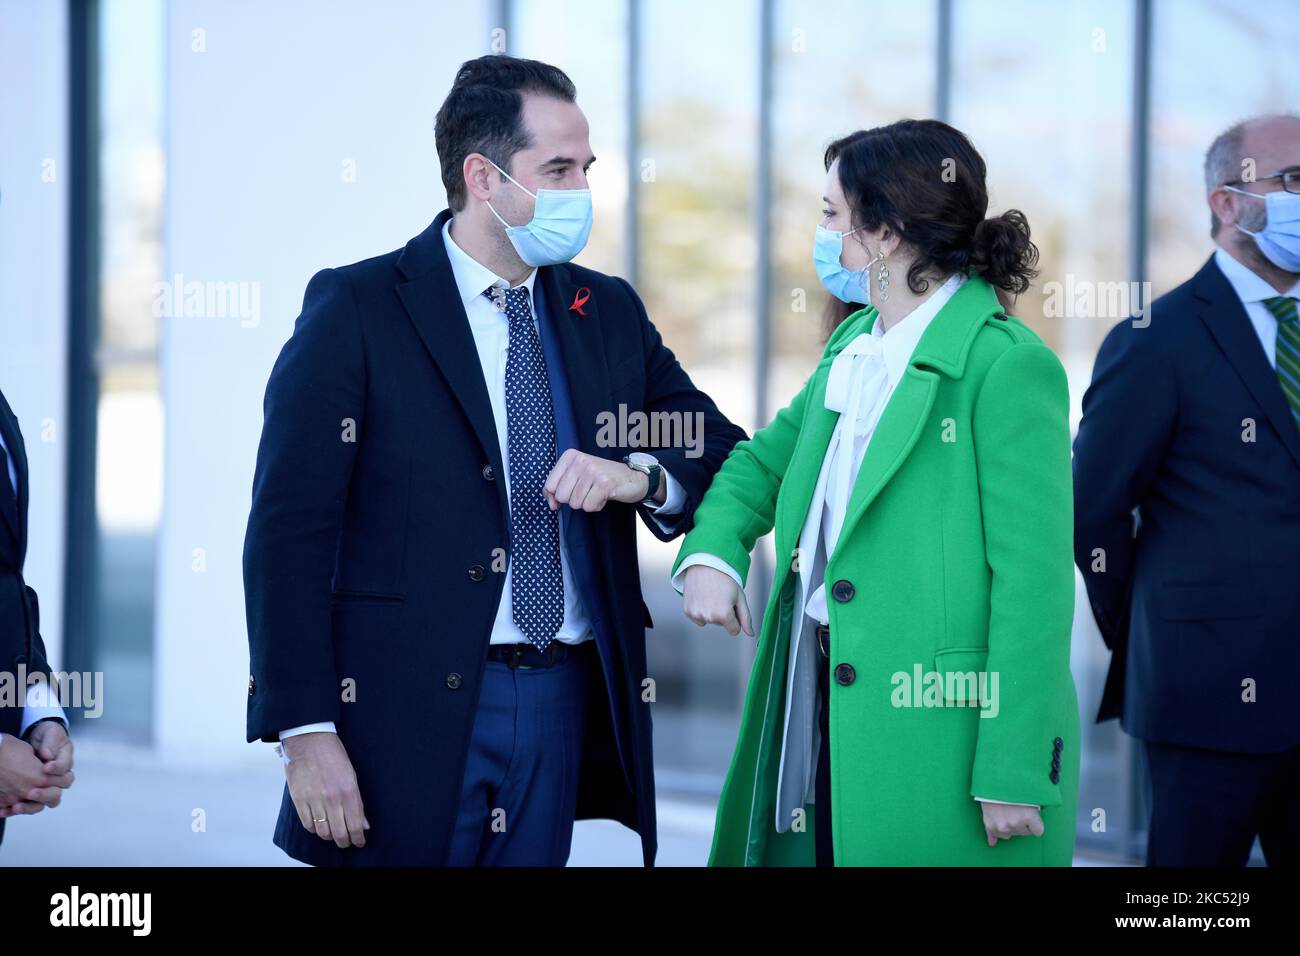 The President of the Community of Madrid, Isabel Díaz Ayuso, accompanied by Ciudadanos (Citizens) political party's leader Ignacio Aguado, presided on Tuesday the opening ceremony of the Hospital Nurse Isabel Zendal in Madrid on 1st December, 2020. (Photo by Juan Carlos Lucas/NurPhoto) Stock Photo